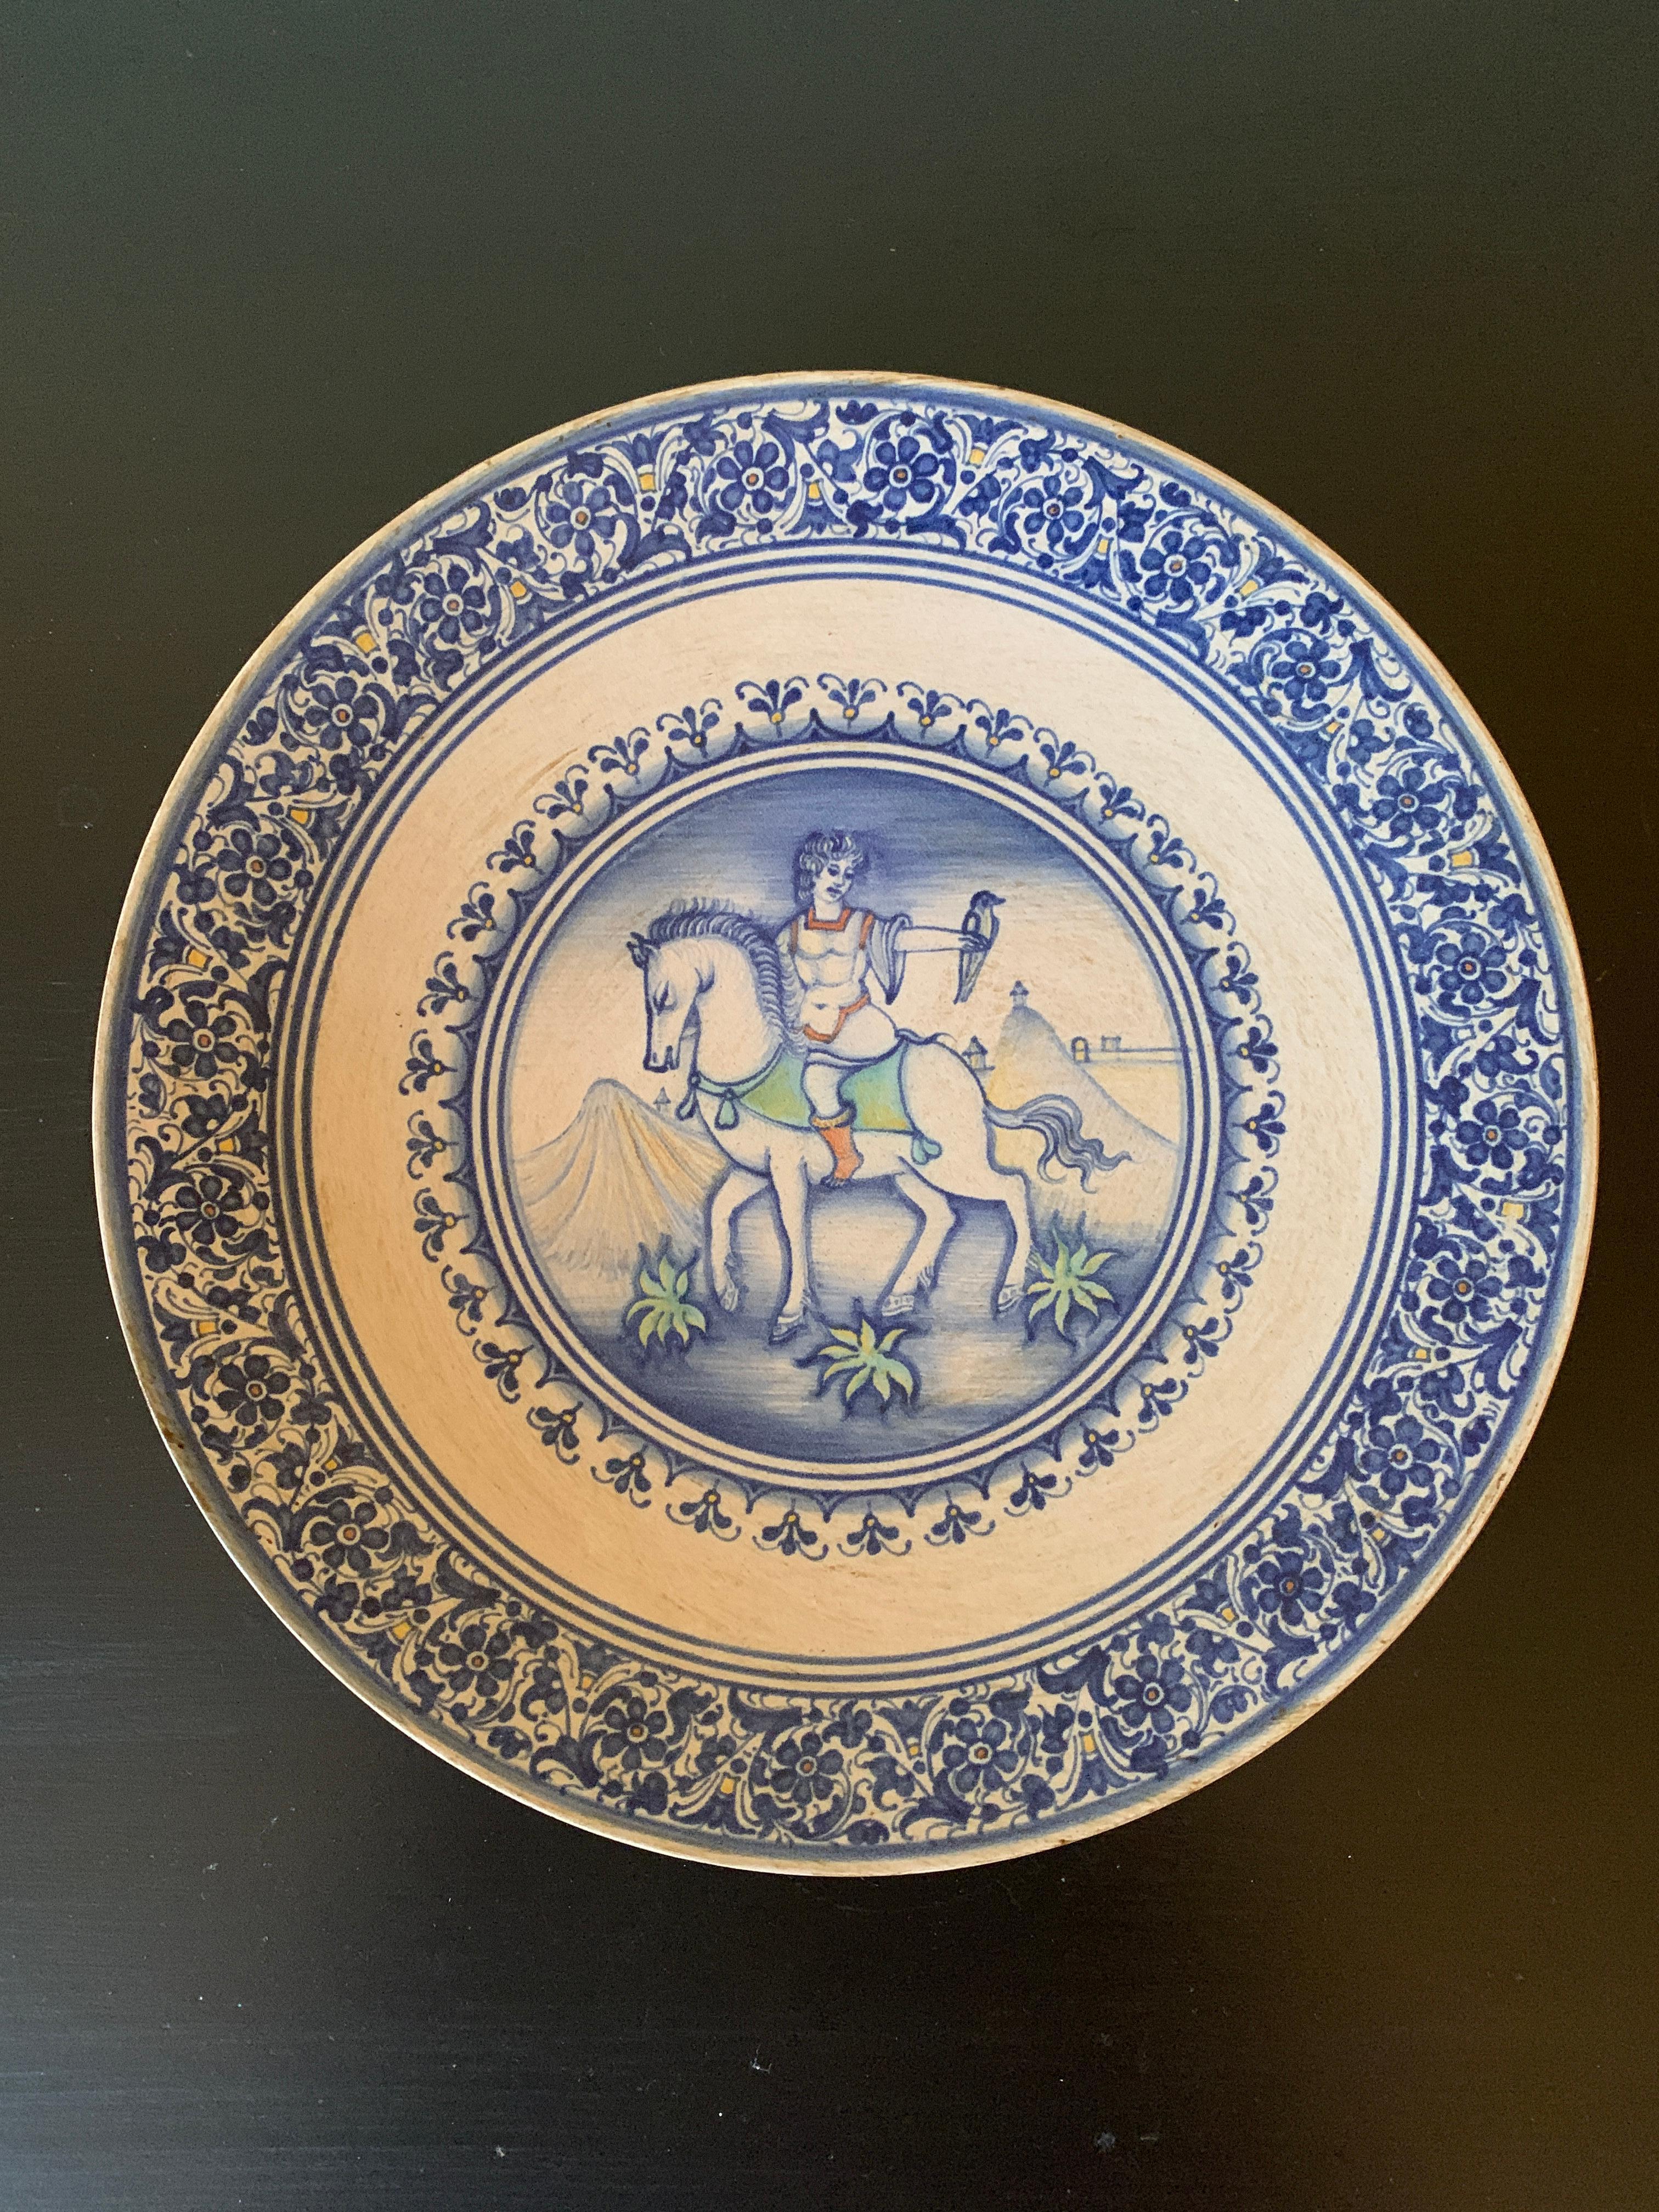 A beautiful hand painted blue, cream, and green faience pottery wall plate featuring an allegorical scene of a man riding a horse with a bird on his arm.

By Cynthia Deruta

Italy, Late-20th Century

Measures: 9.75